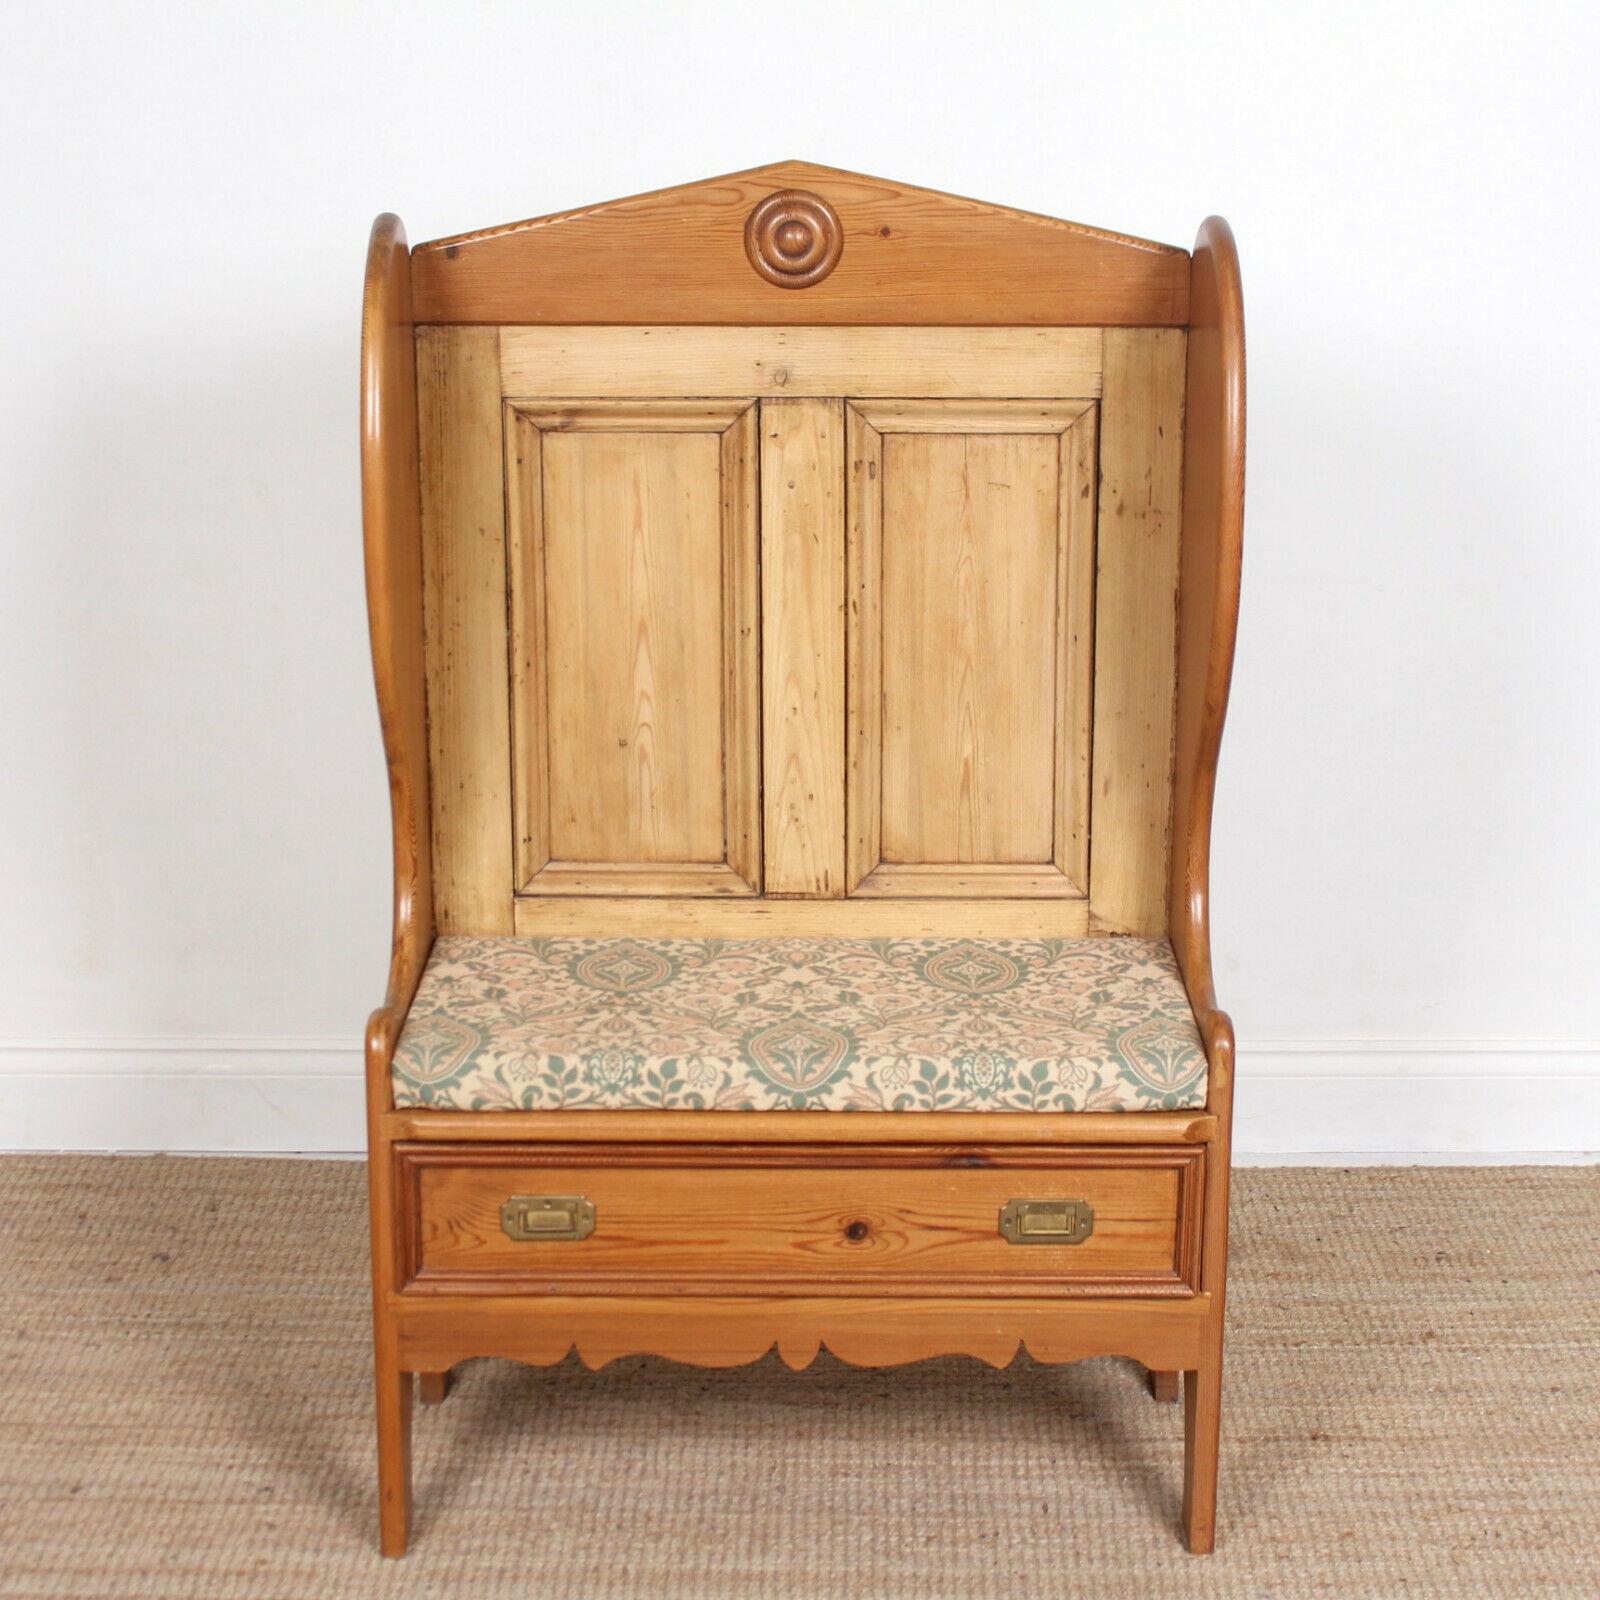 An impressive carved and paneled pine settle in the Arts & Crafts manner.

The paneled upstand with carved motif and supports above a removable upholstered seat and drawer with brass inset handles, dovetailed jointing and pine